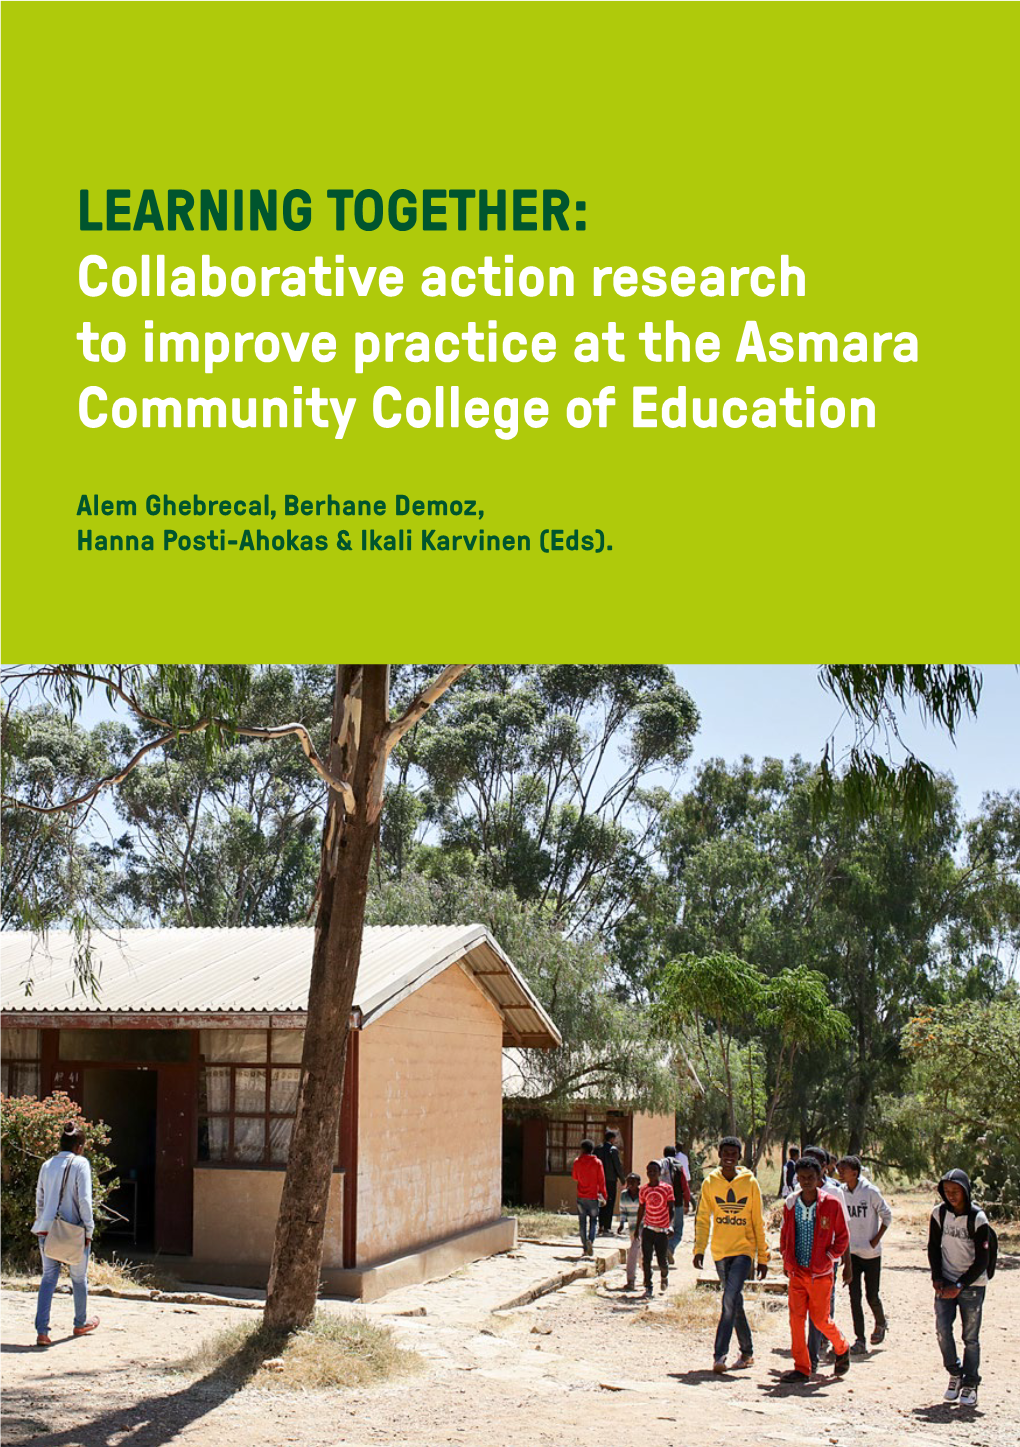 LEARNING TOGETHER: Collaborative Action Research to Improve Practice at the Asmara Community College of Education